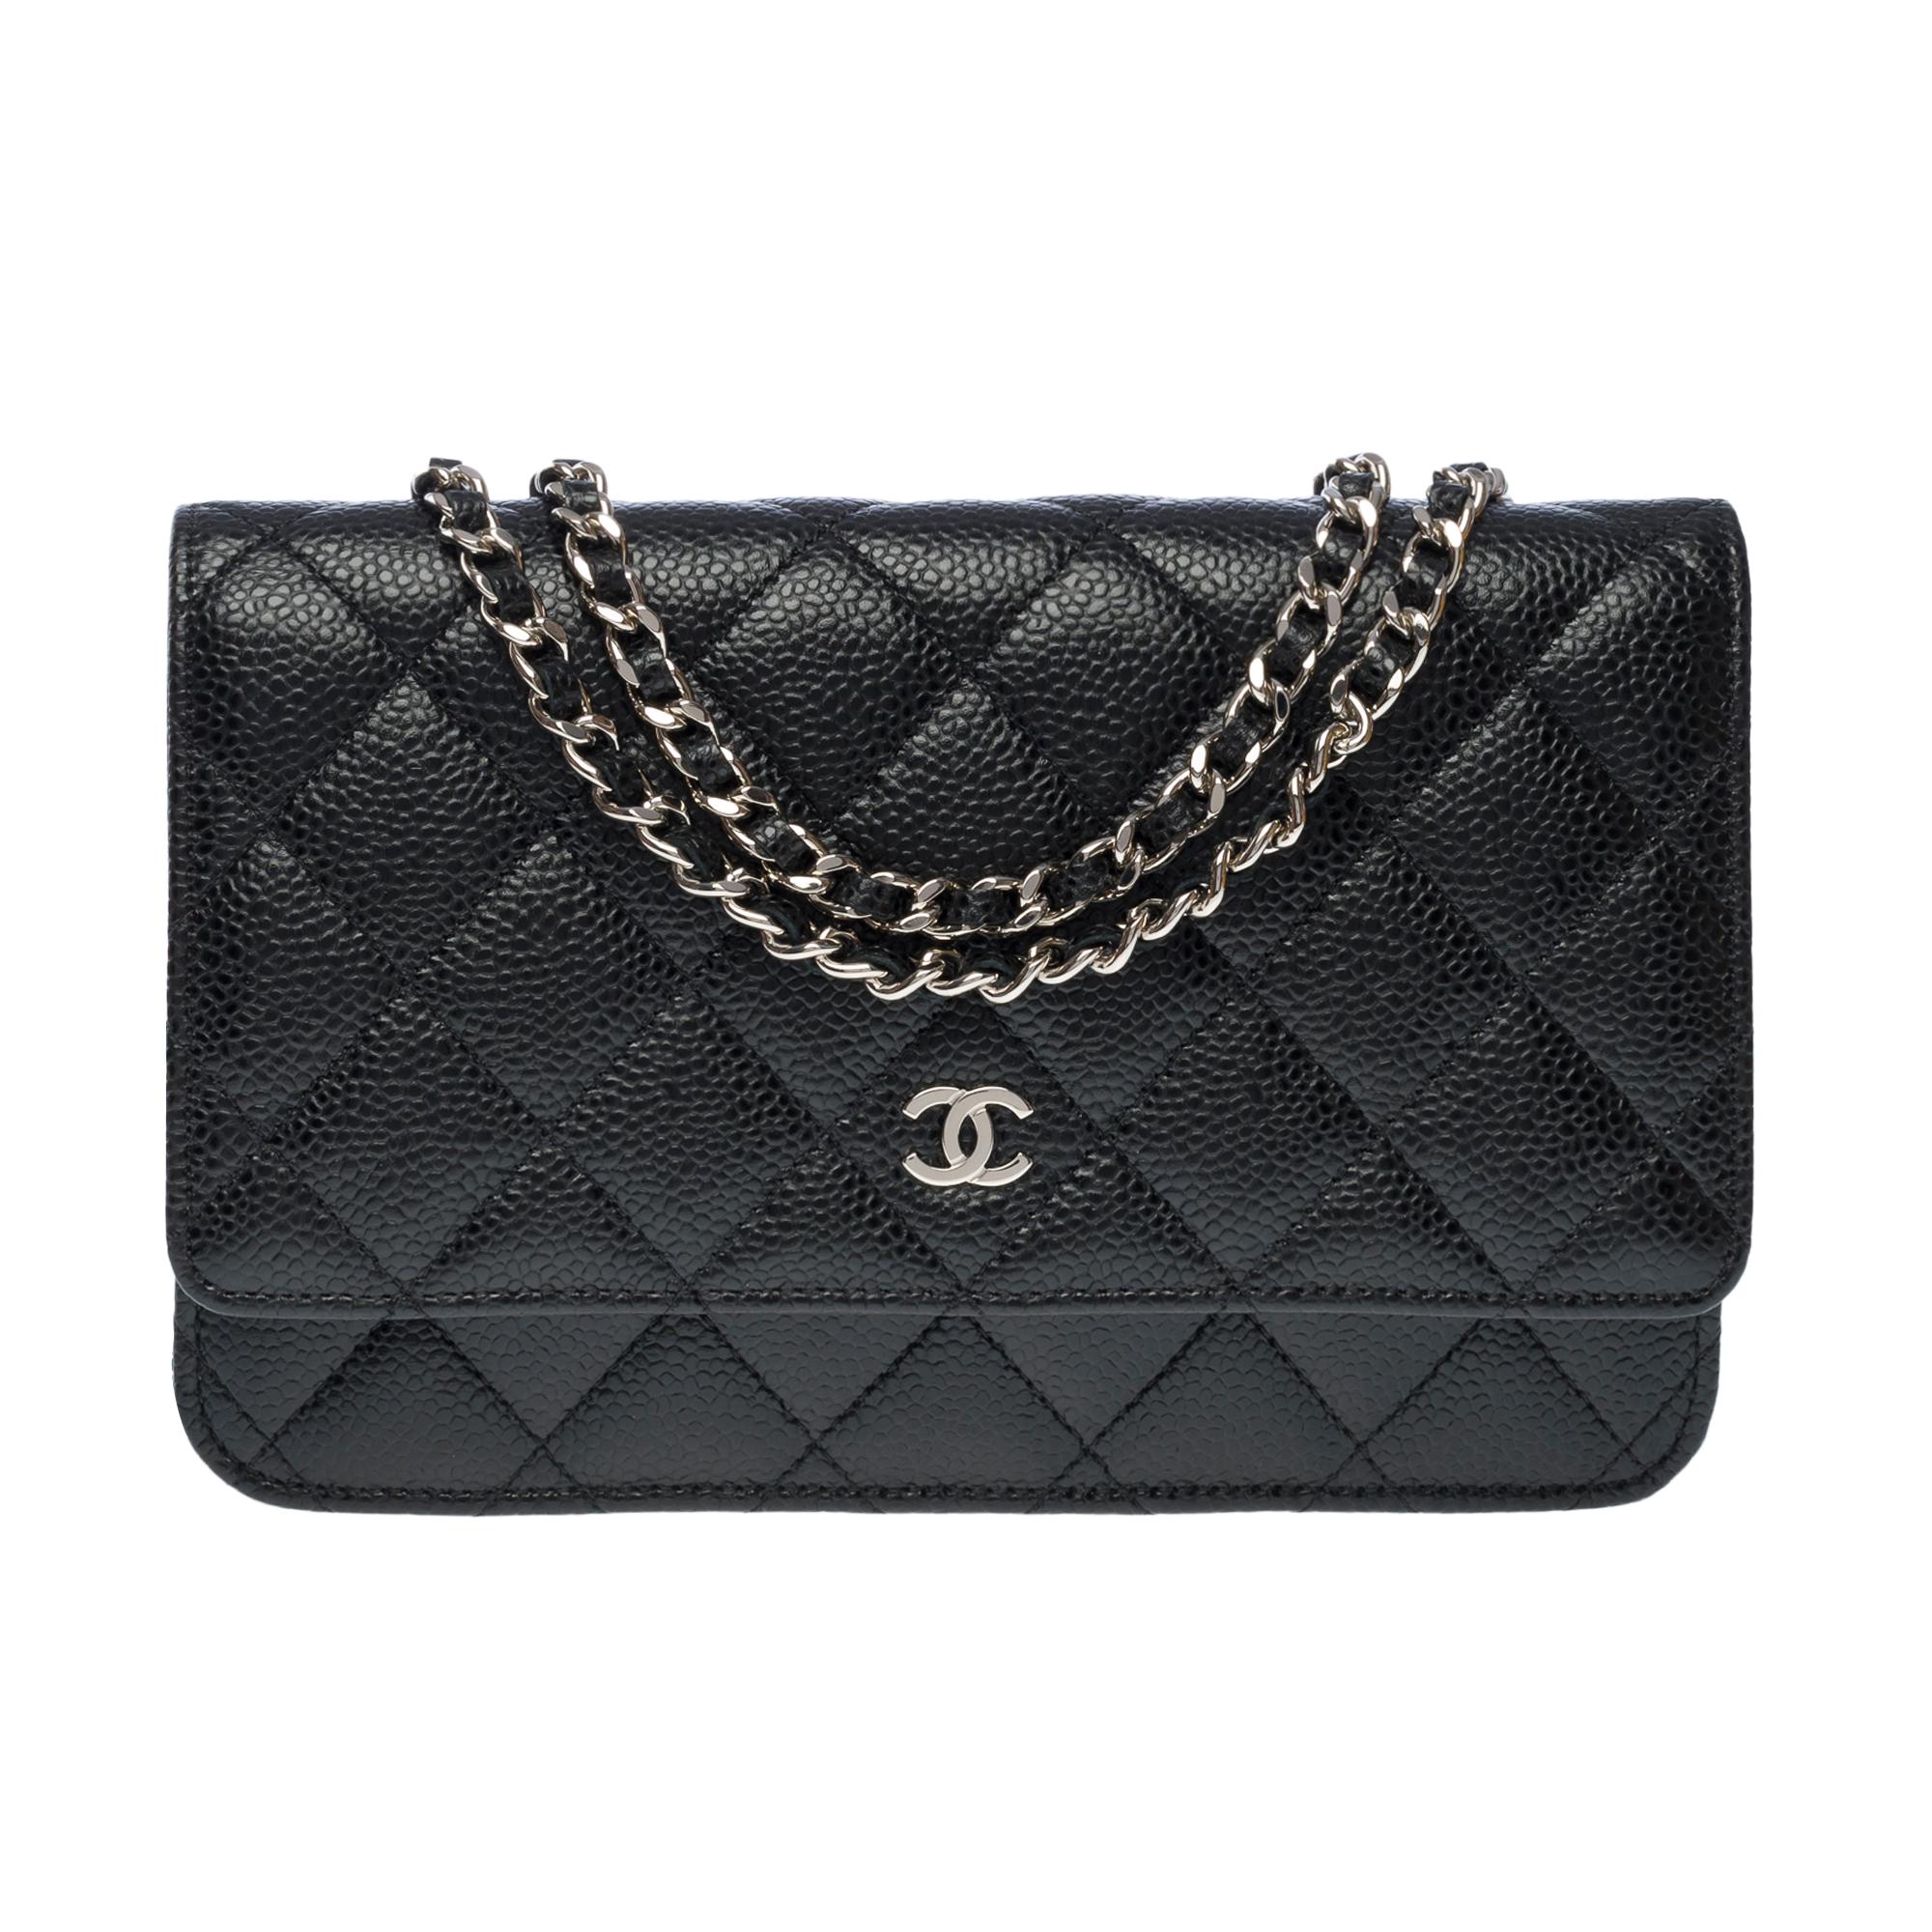 Lovely Chanel Wallet On Chain (WOC) shoulder bag in black caviar quilted leather, silver metal hardware, a silver metal chain handle interwoven with black leather for a shoulder and crossbody carry

Silver Metal Flap Closure
A patch pocket at the